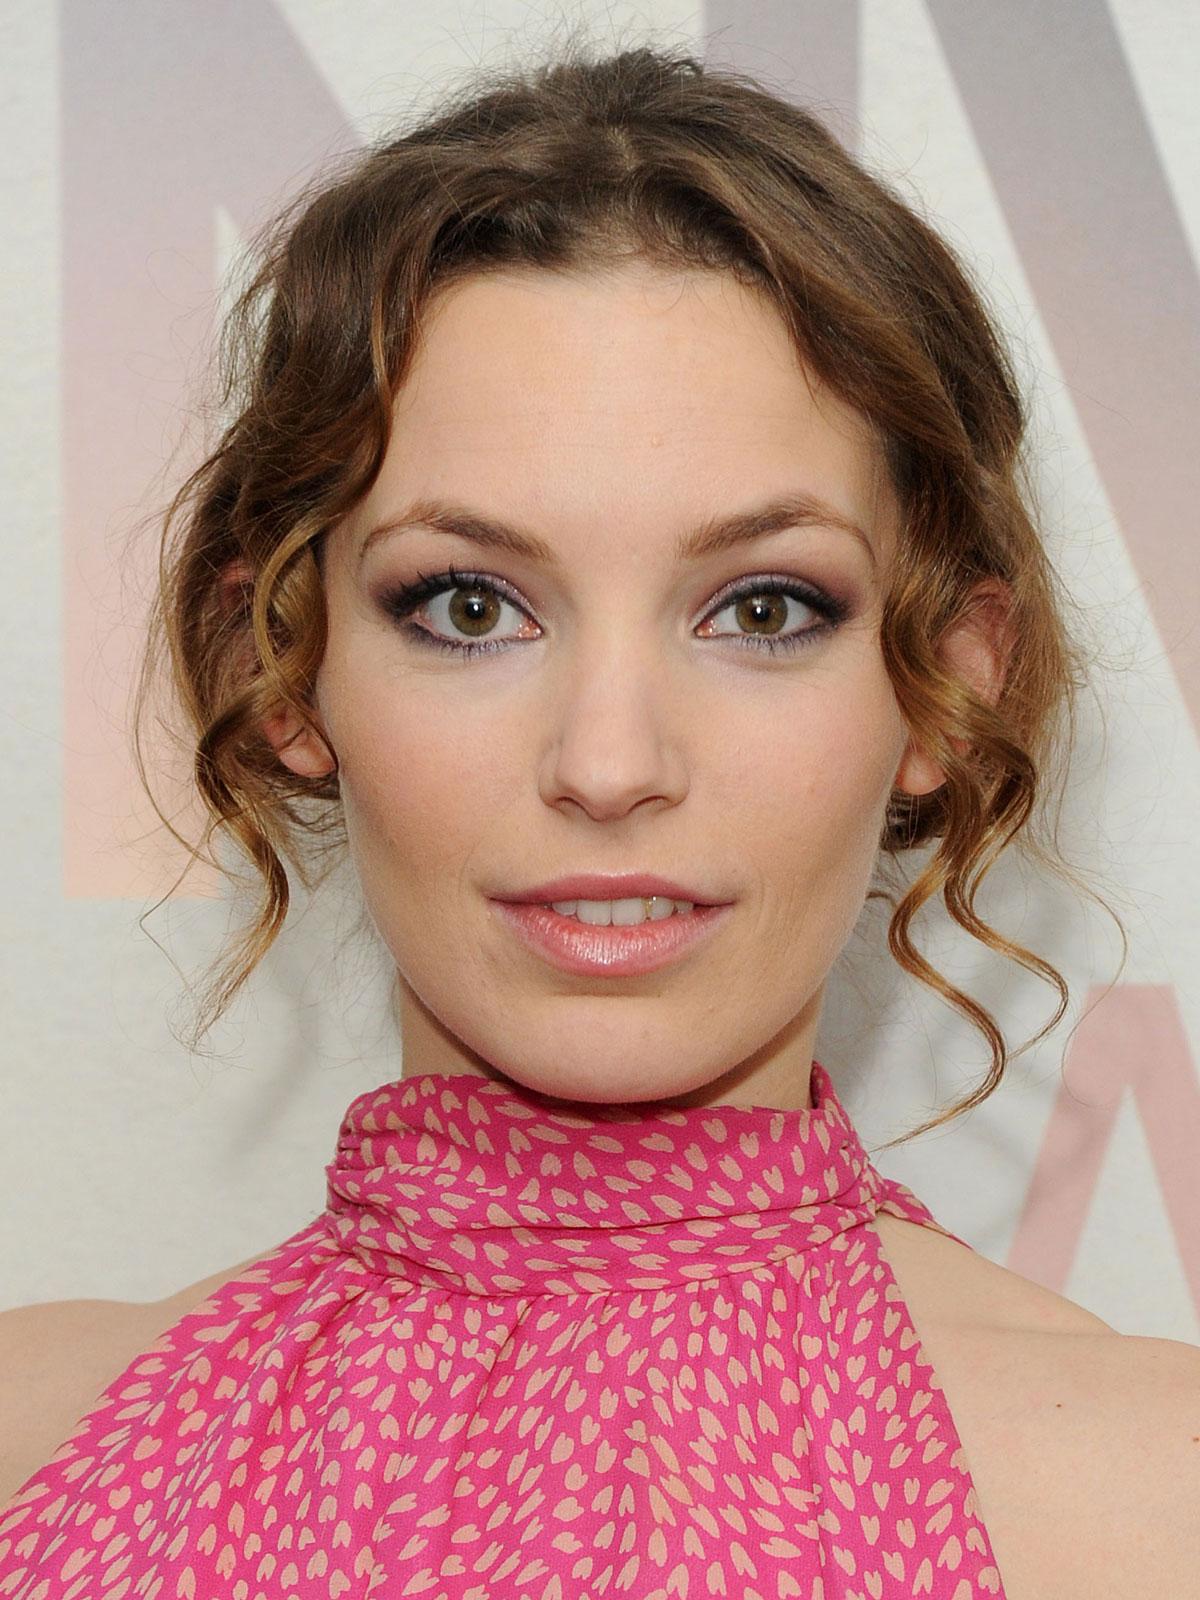 70+ Hot Pictures of Perdita Weeks Is Like A Slice Of Heaven Of Earth 20